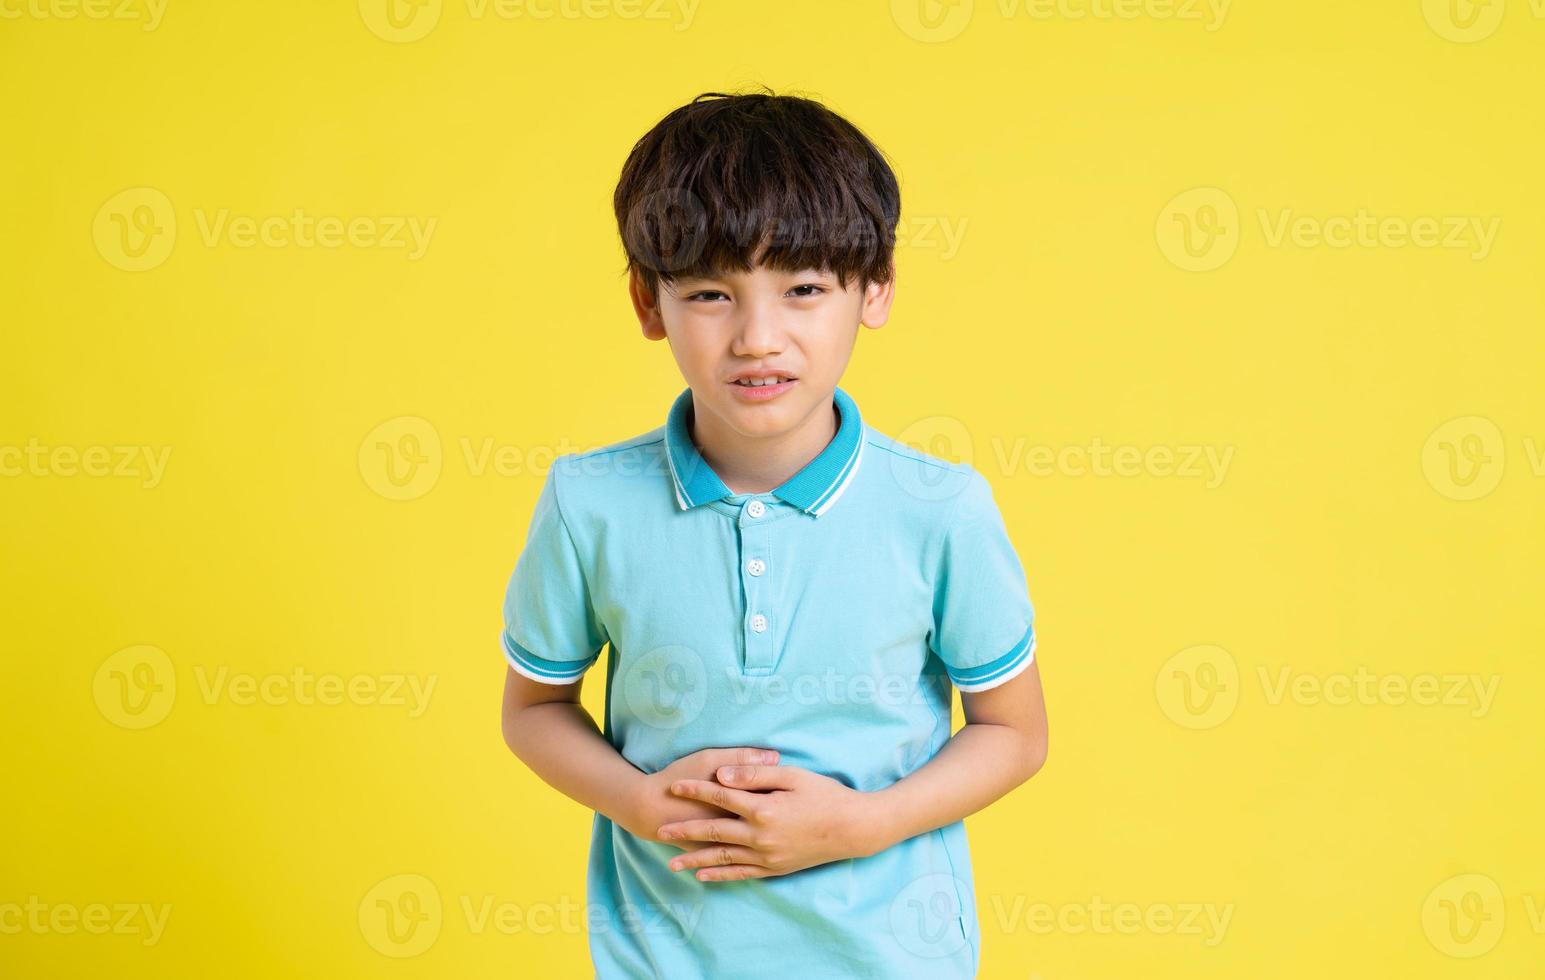 portrait of an asian boy posing on a yellow background photo